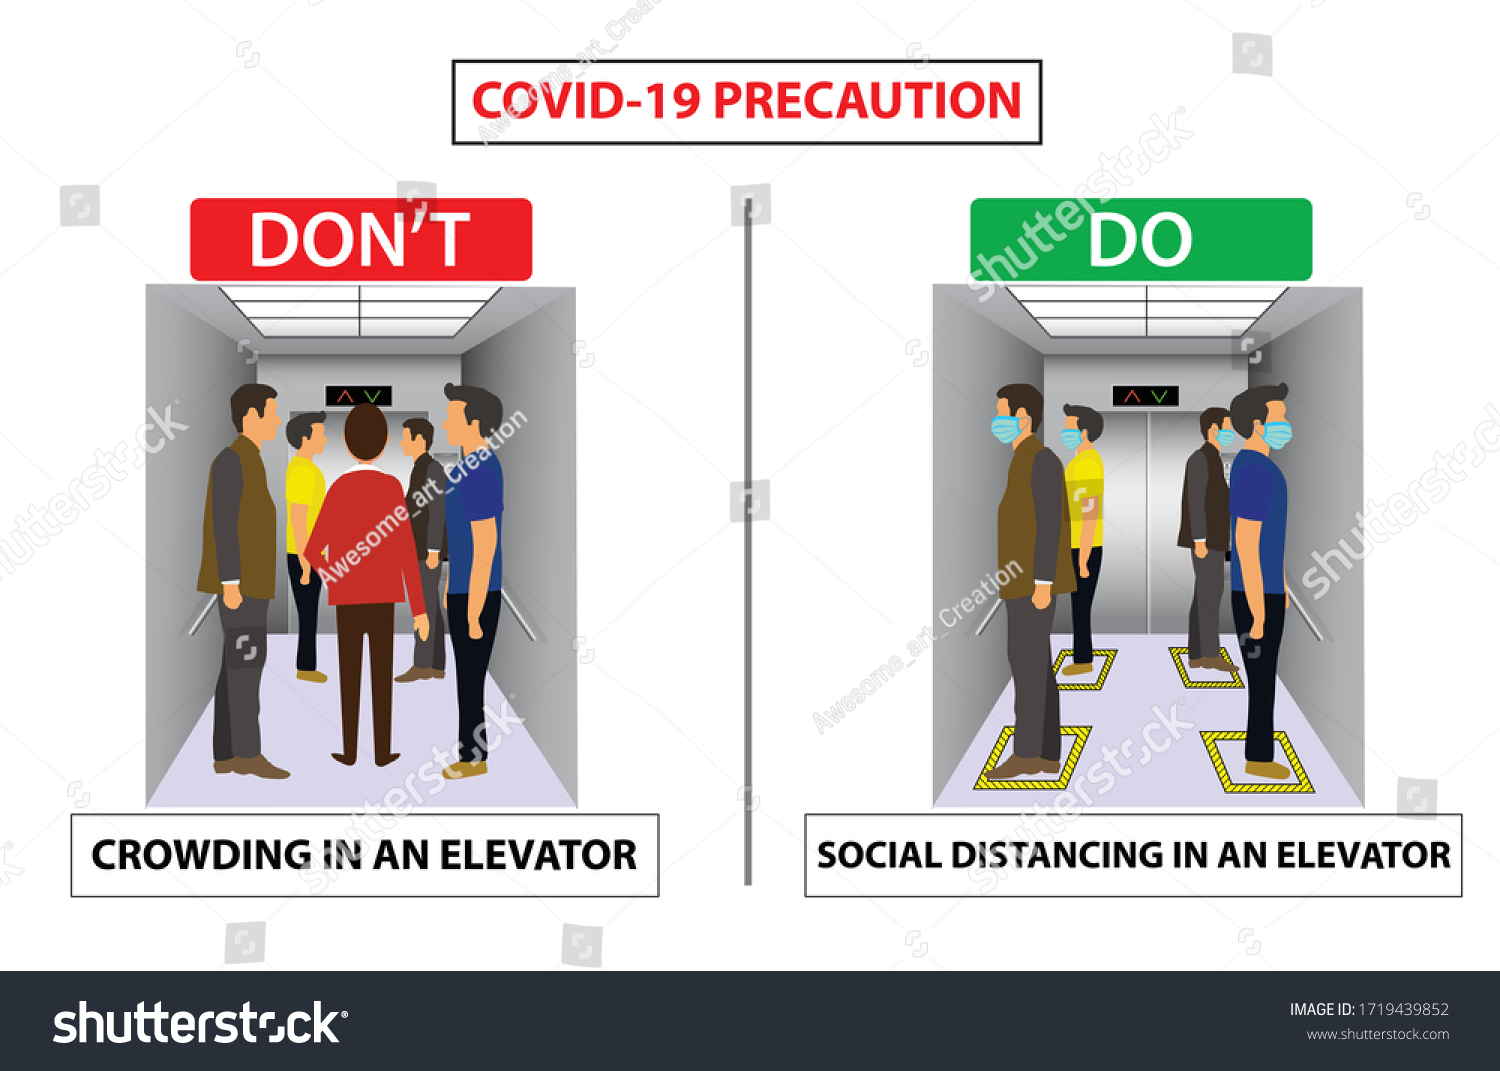 Do and don't poster for covid 19 corona virus. Safety instruction for office employees and staff. Social distancing maintain in an elevator.  Social distance in lift and elevator for public. #1719439852